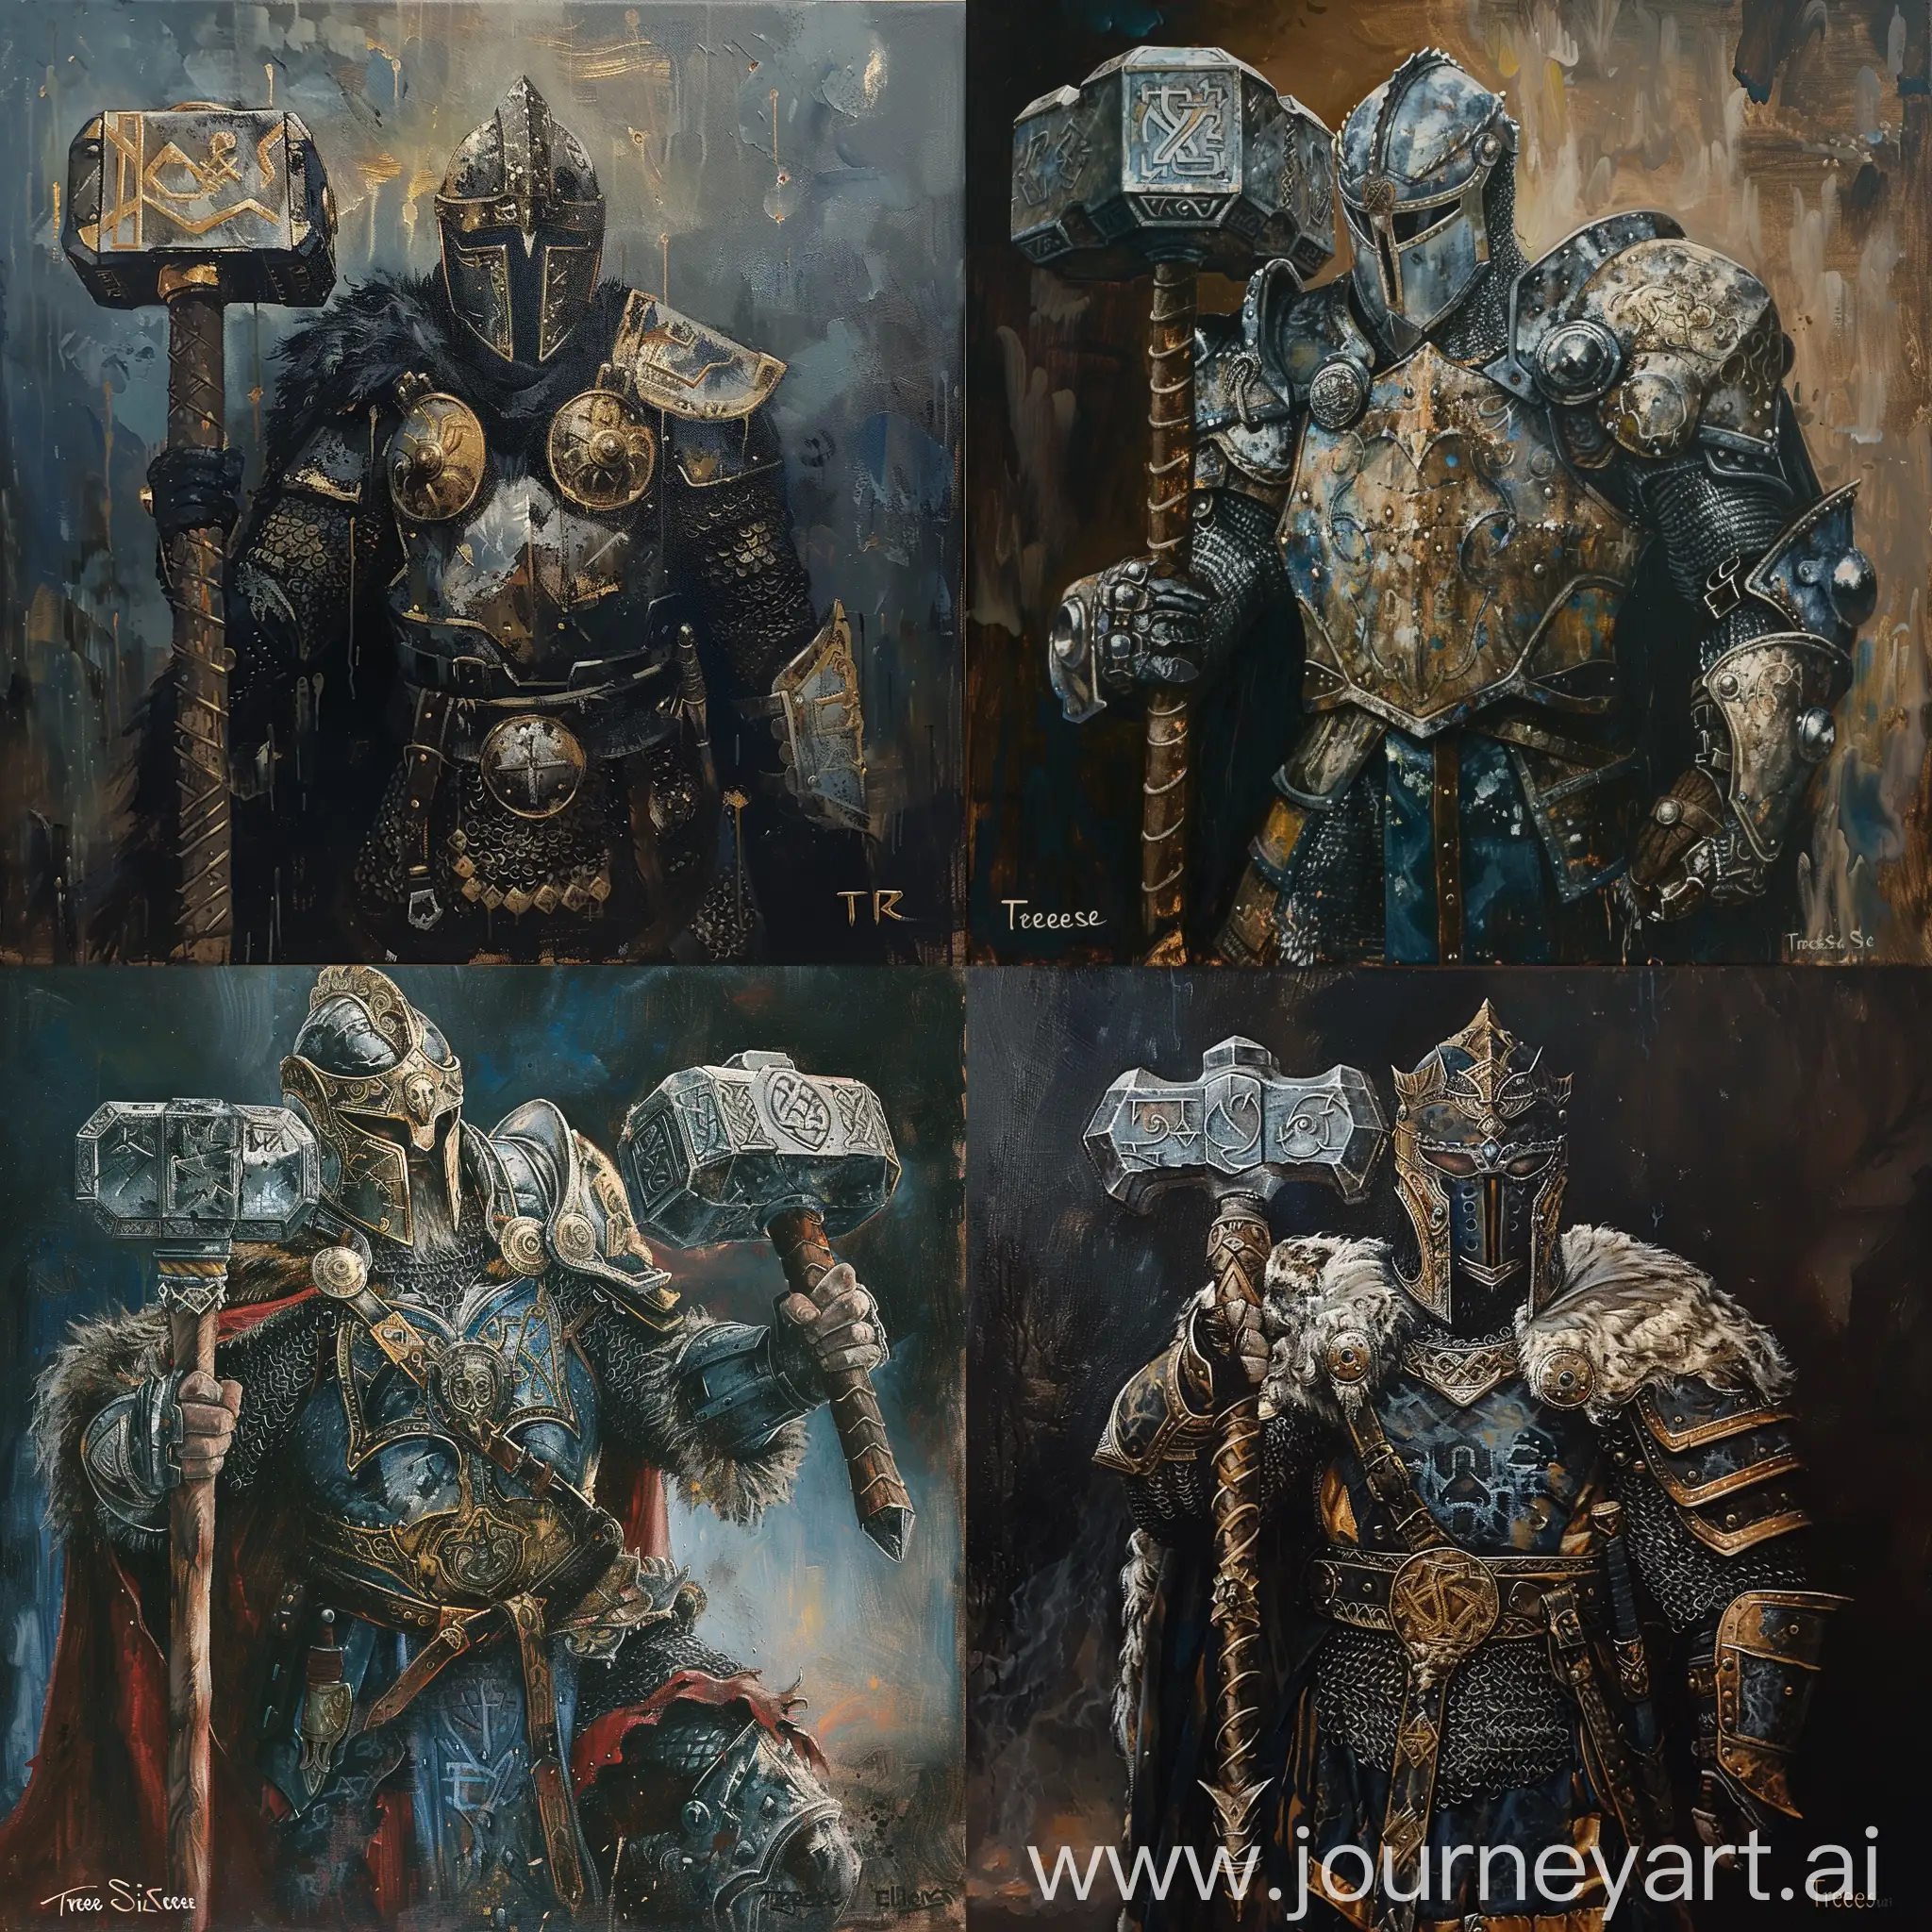 Norse knight with large phantasy hammer.
In the art style of Terese Nielsen oil painting